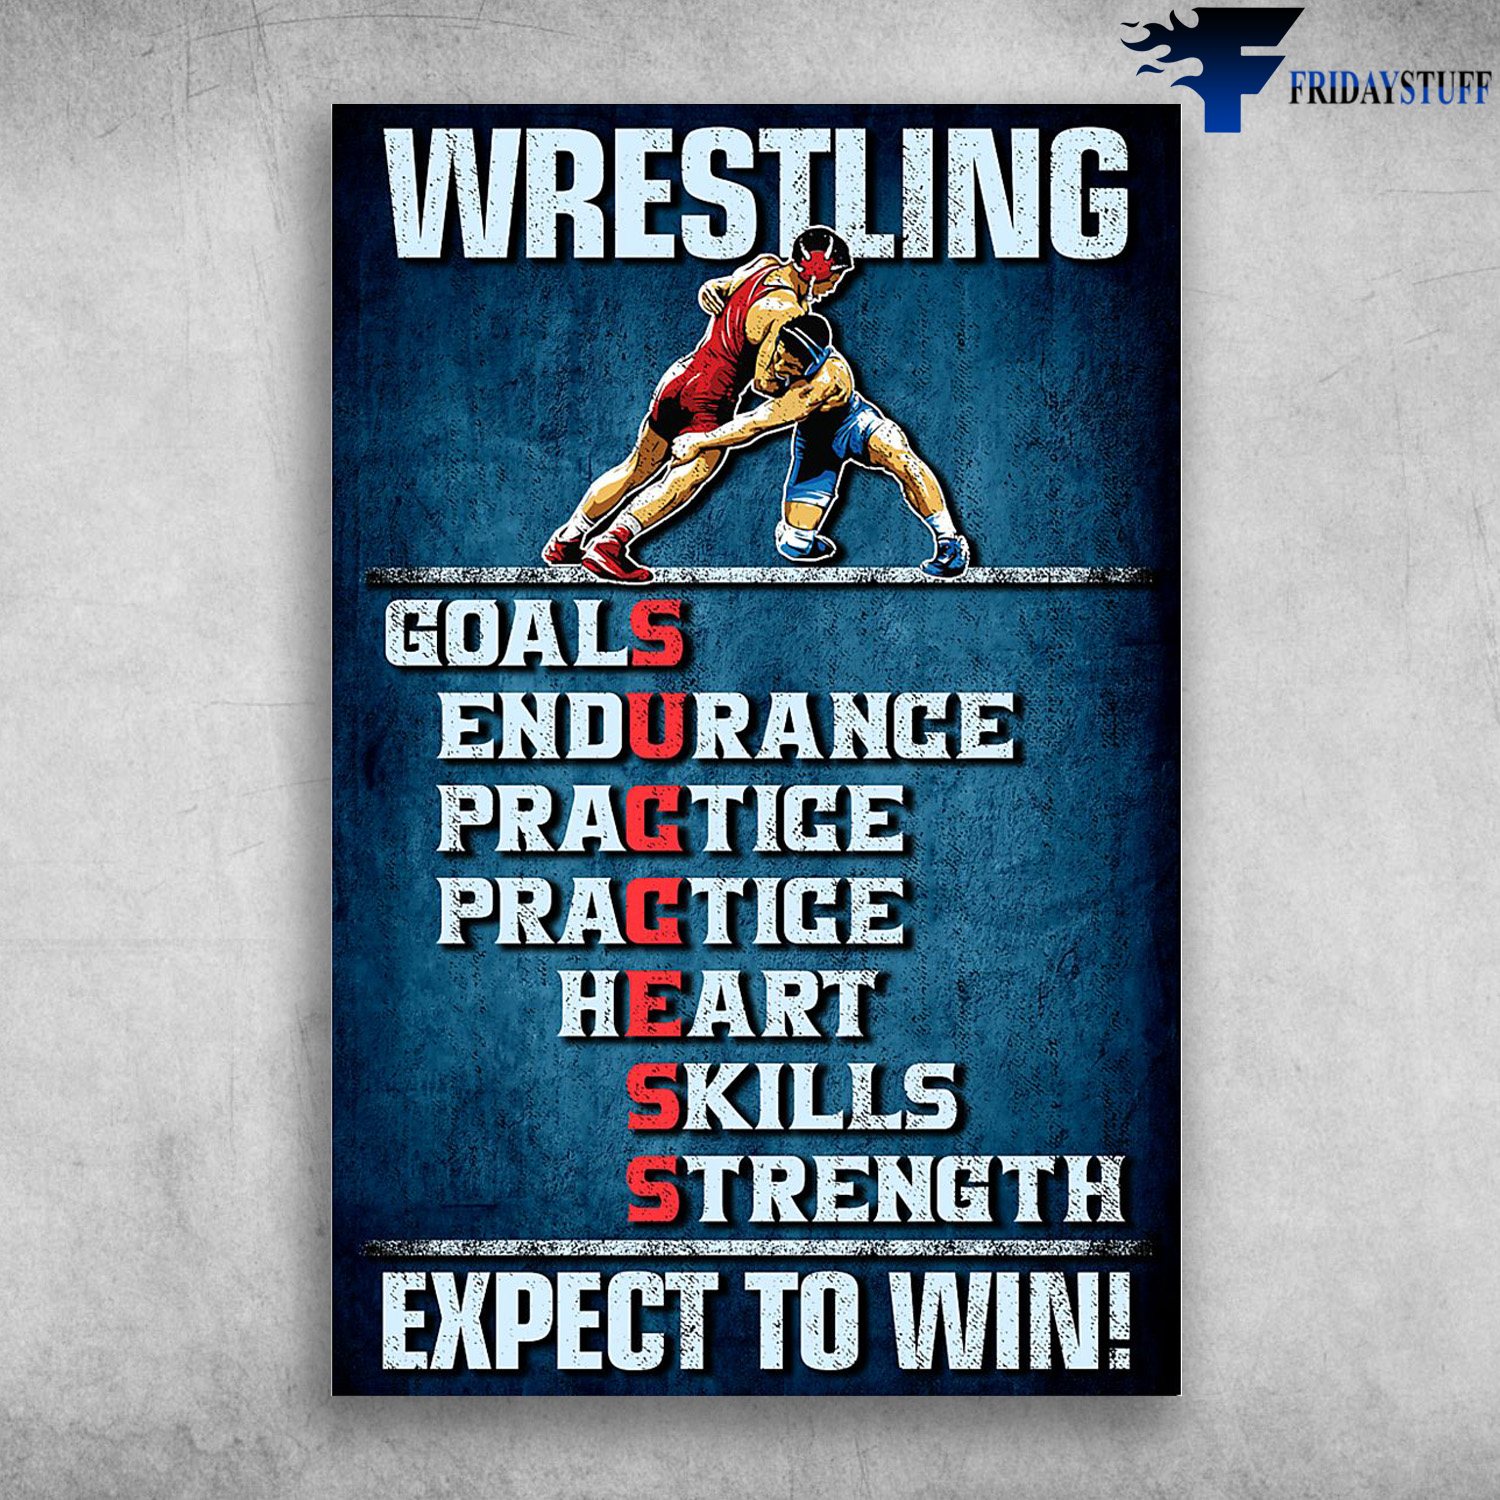 Two Man Wrestling - Goals, Endurange, Practice, Heart, Skill, Strength Expect To Win